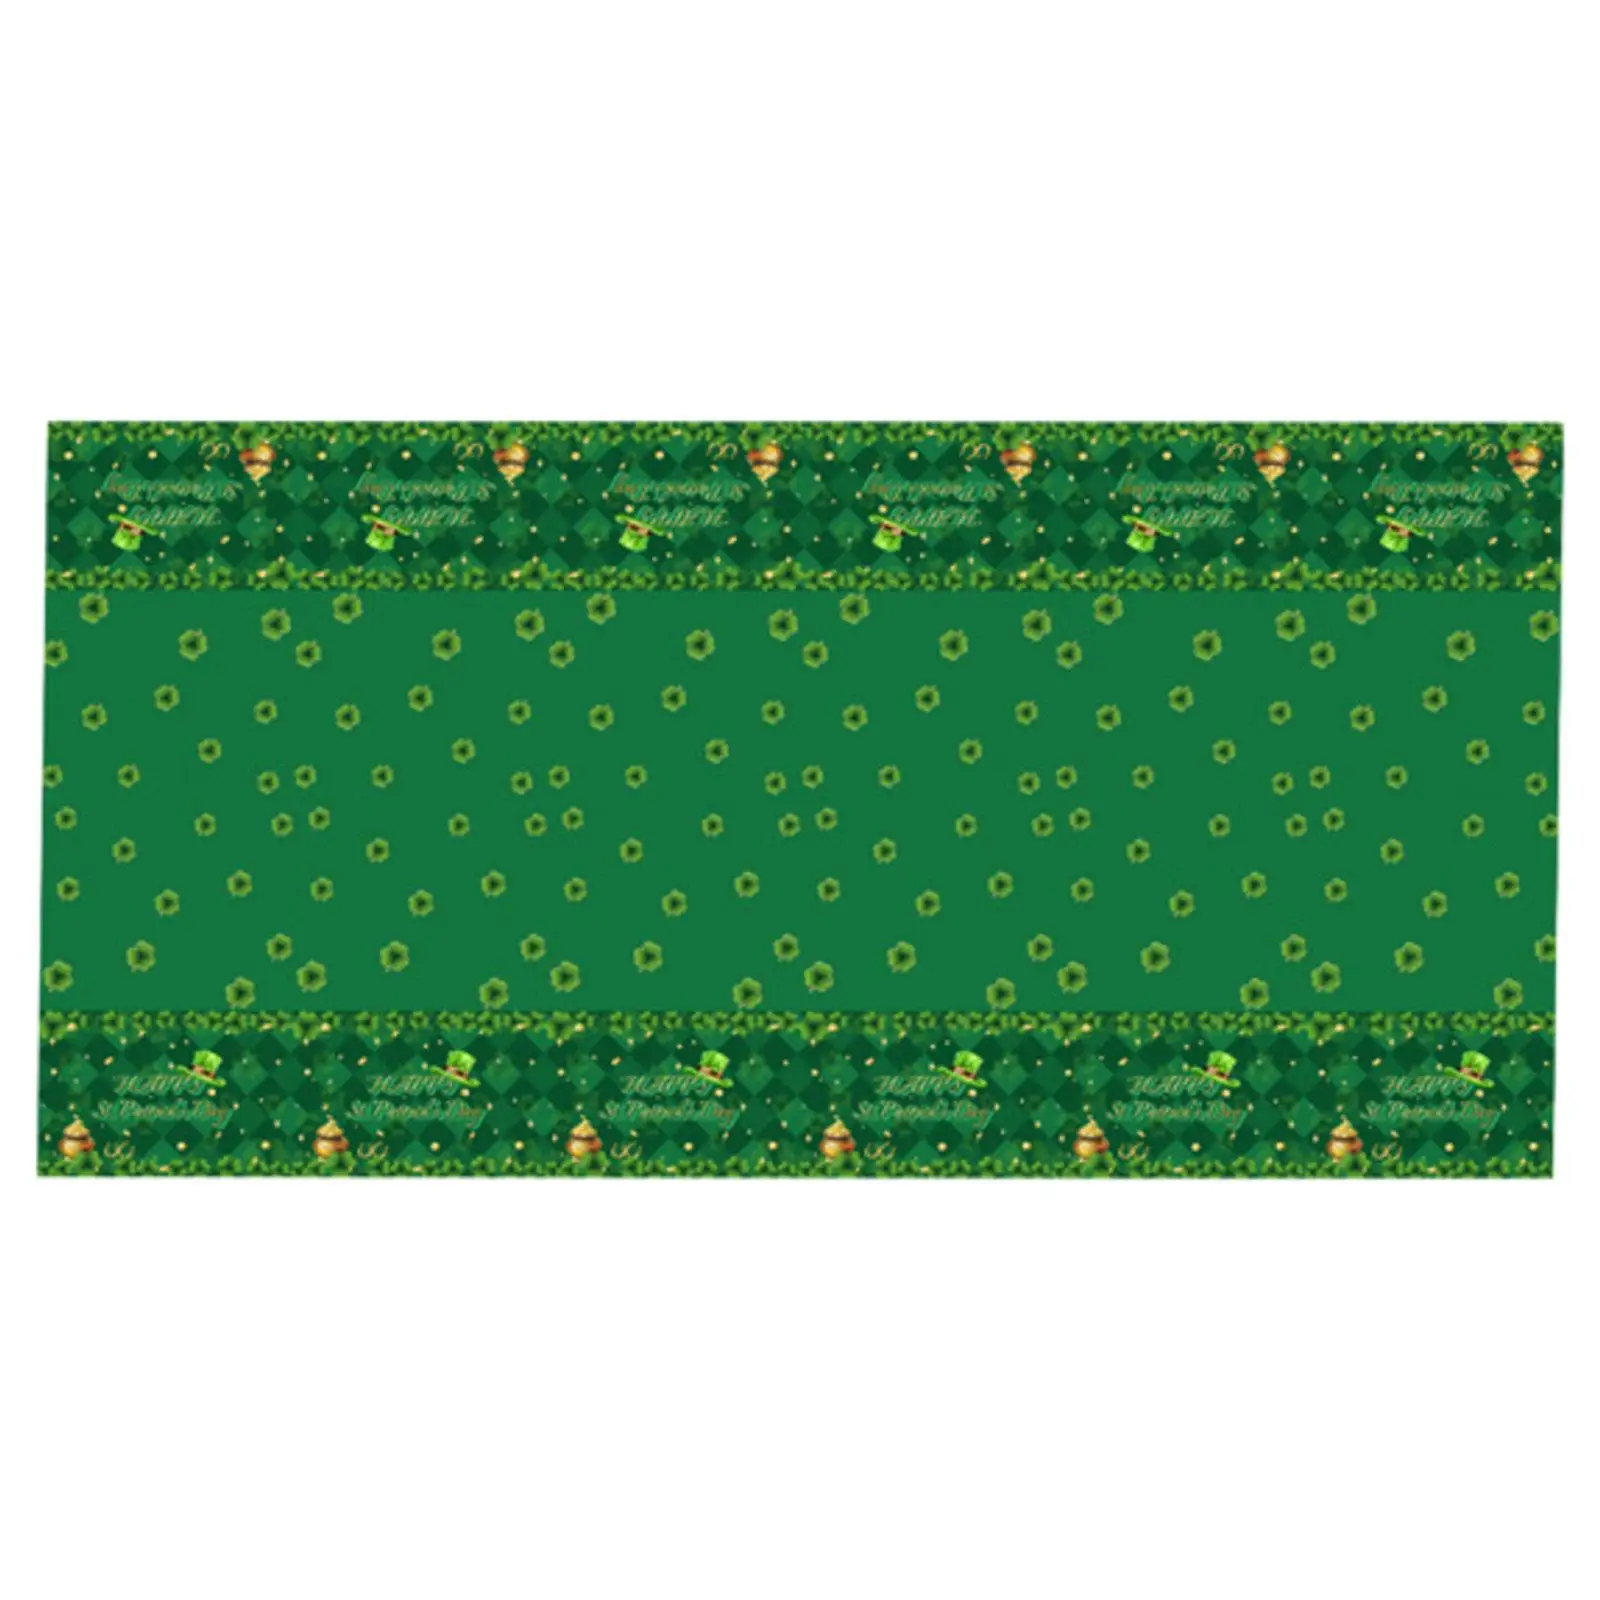 

ST. Patrick's Day Tablecloth Buffalo Plaid 54 x 108 inch Disposable Table Cloth for Dinner Table Farmhouse Party Banquet Kitchen